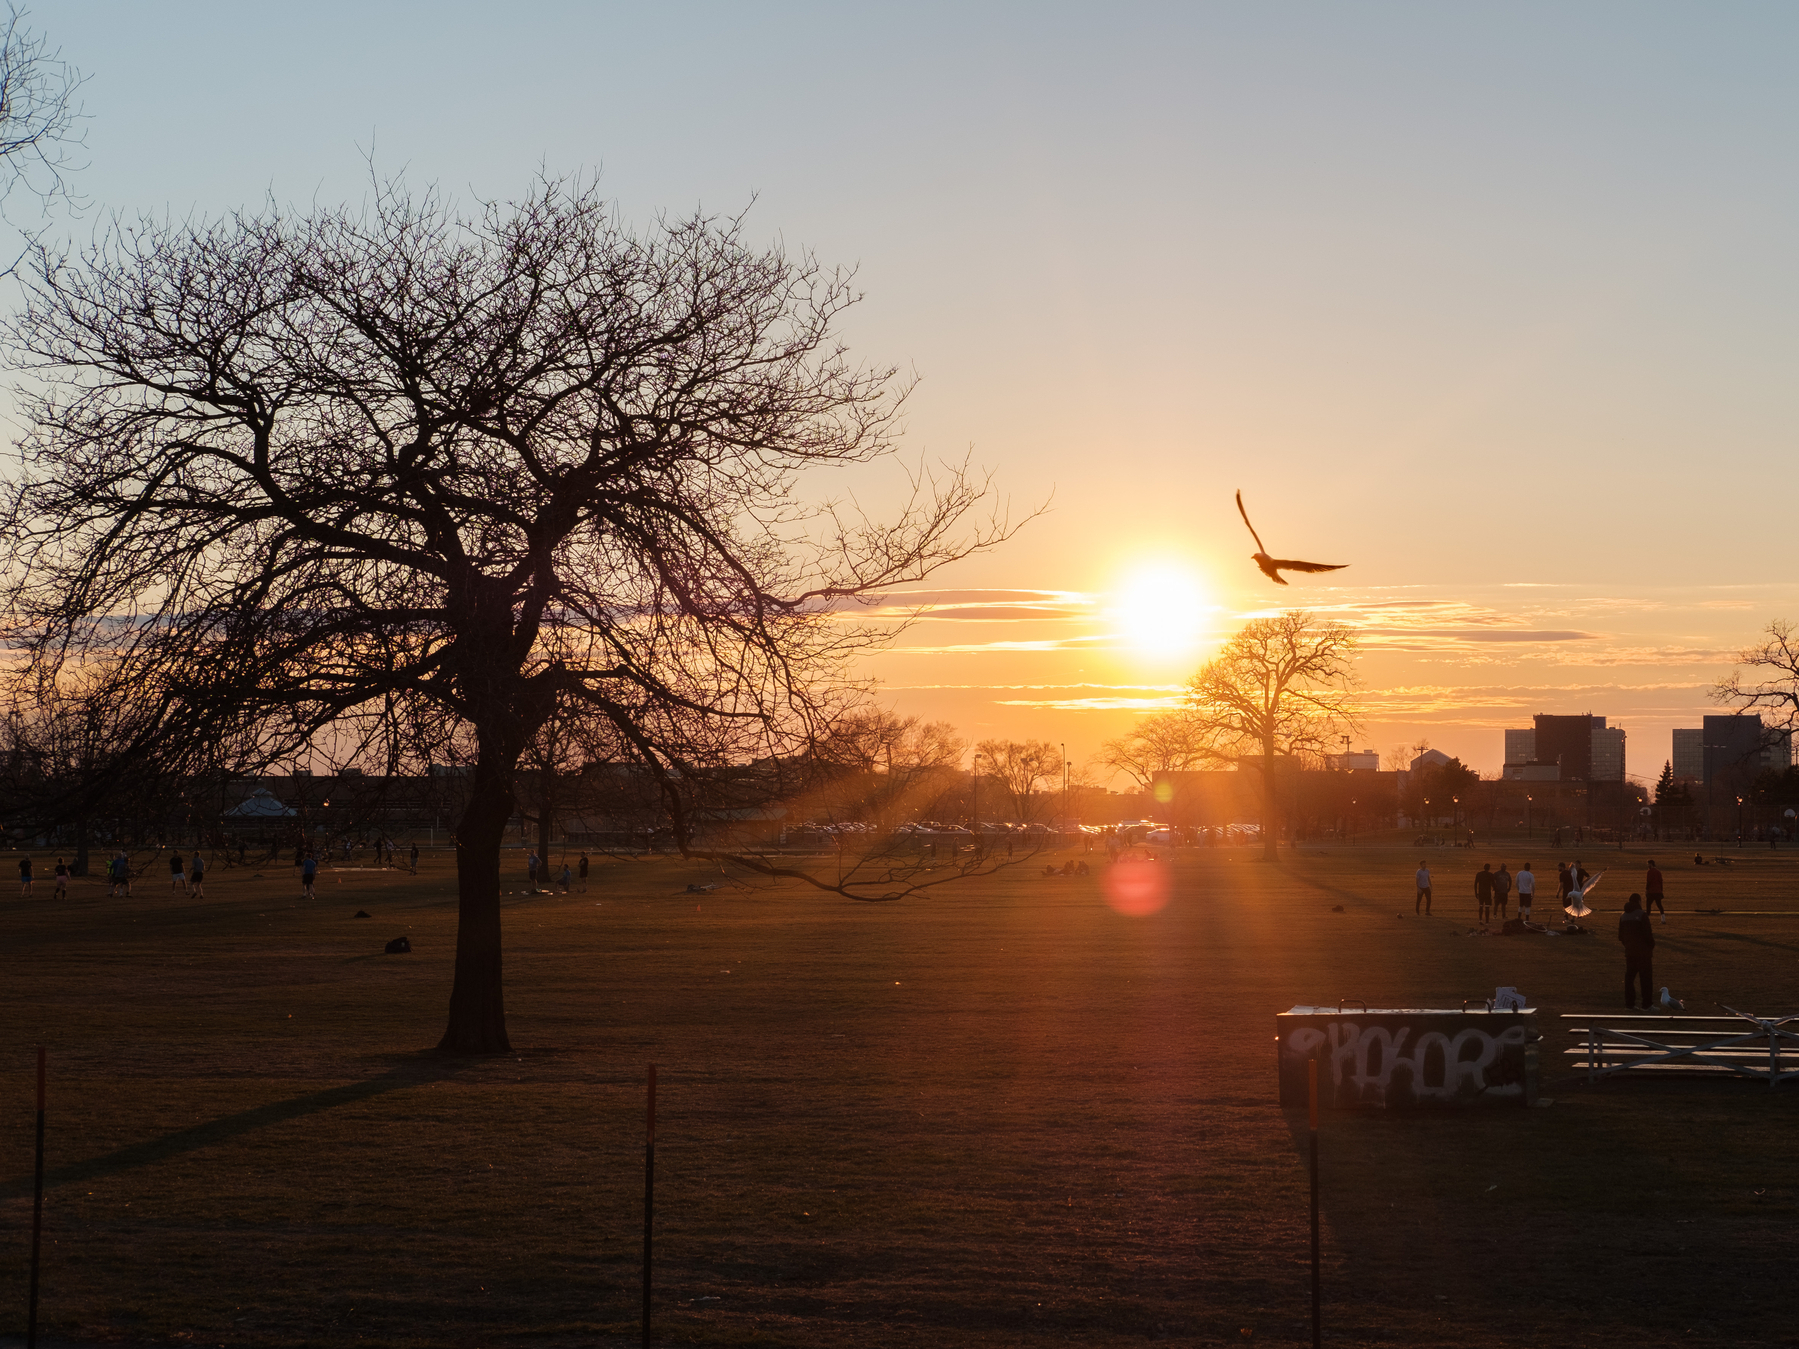 A gull flies past a tree as the sun sets in Parc Jarry.